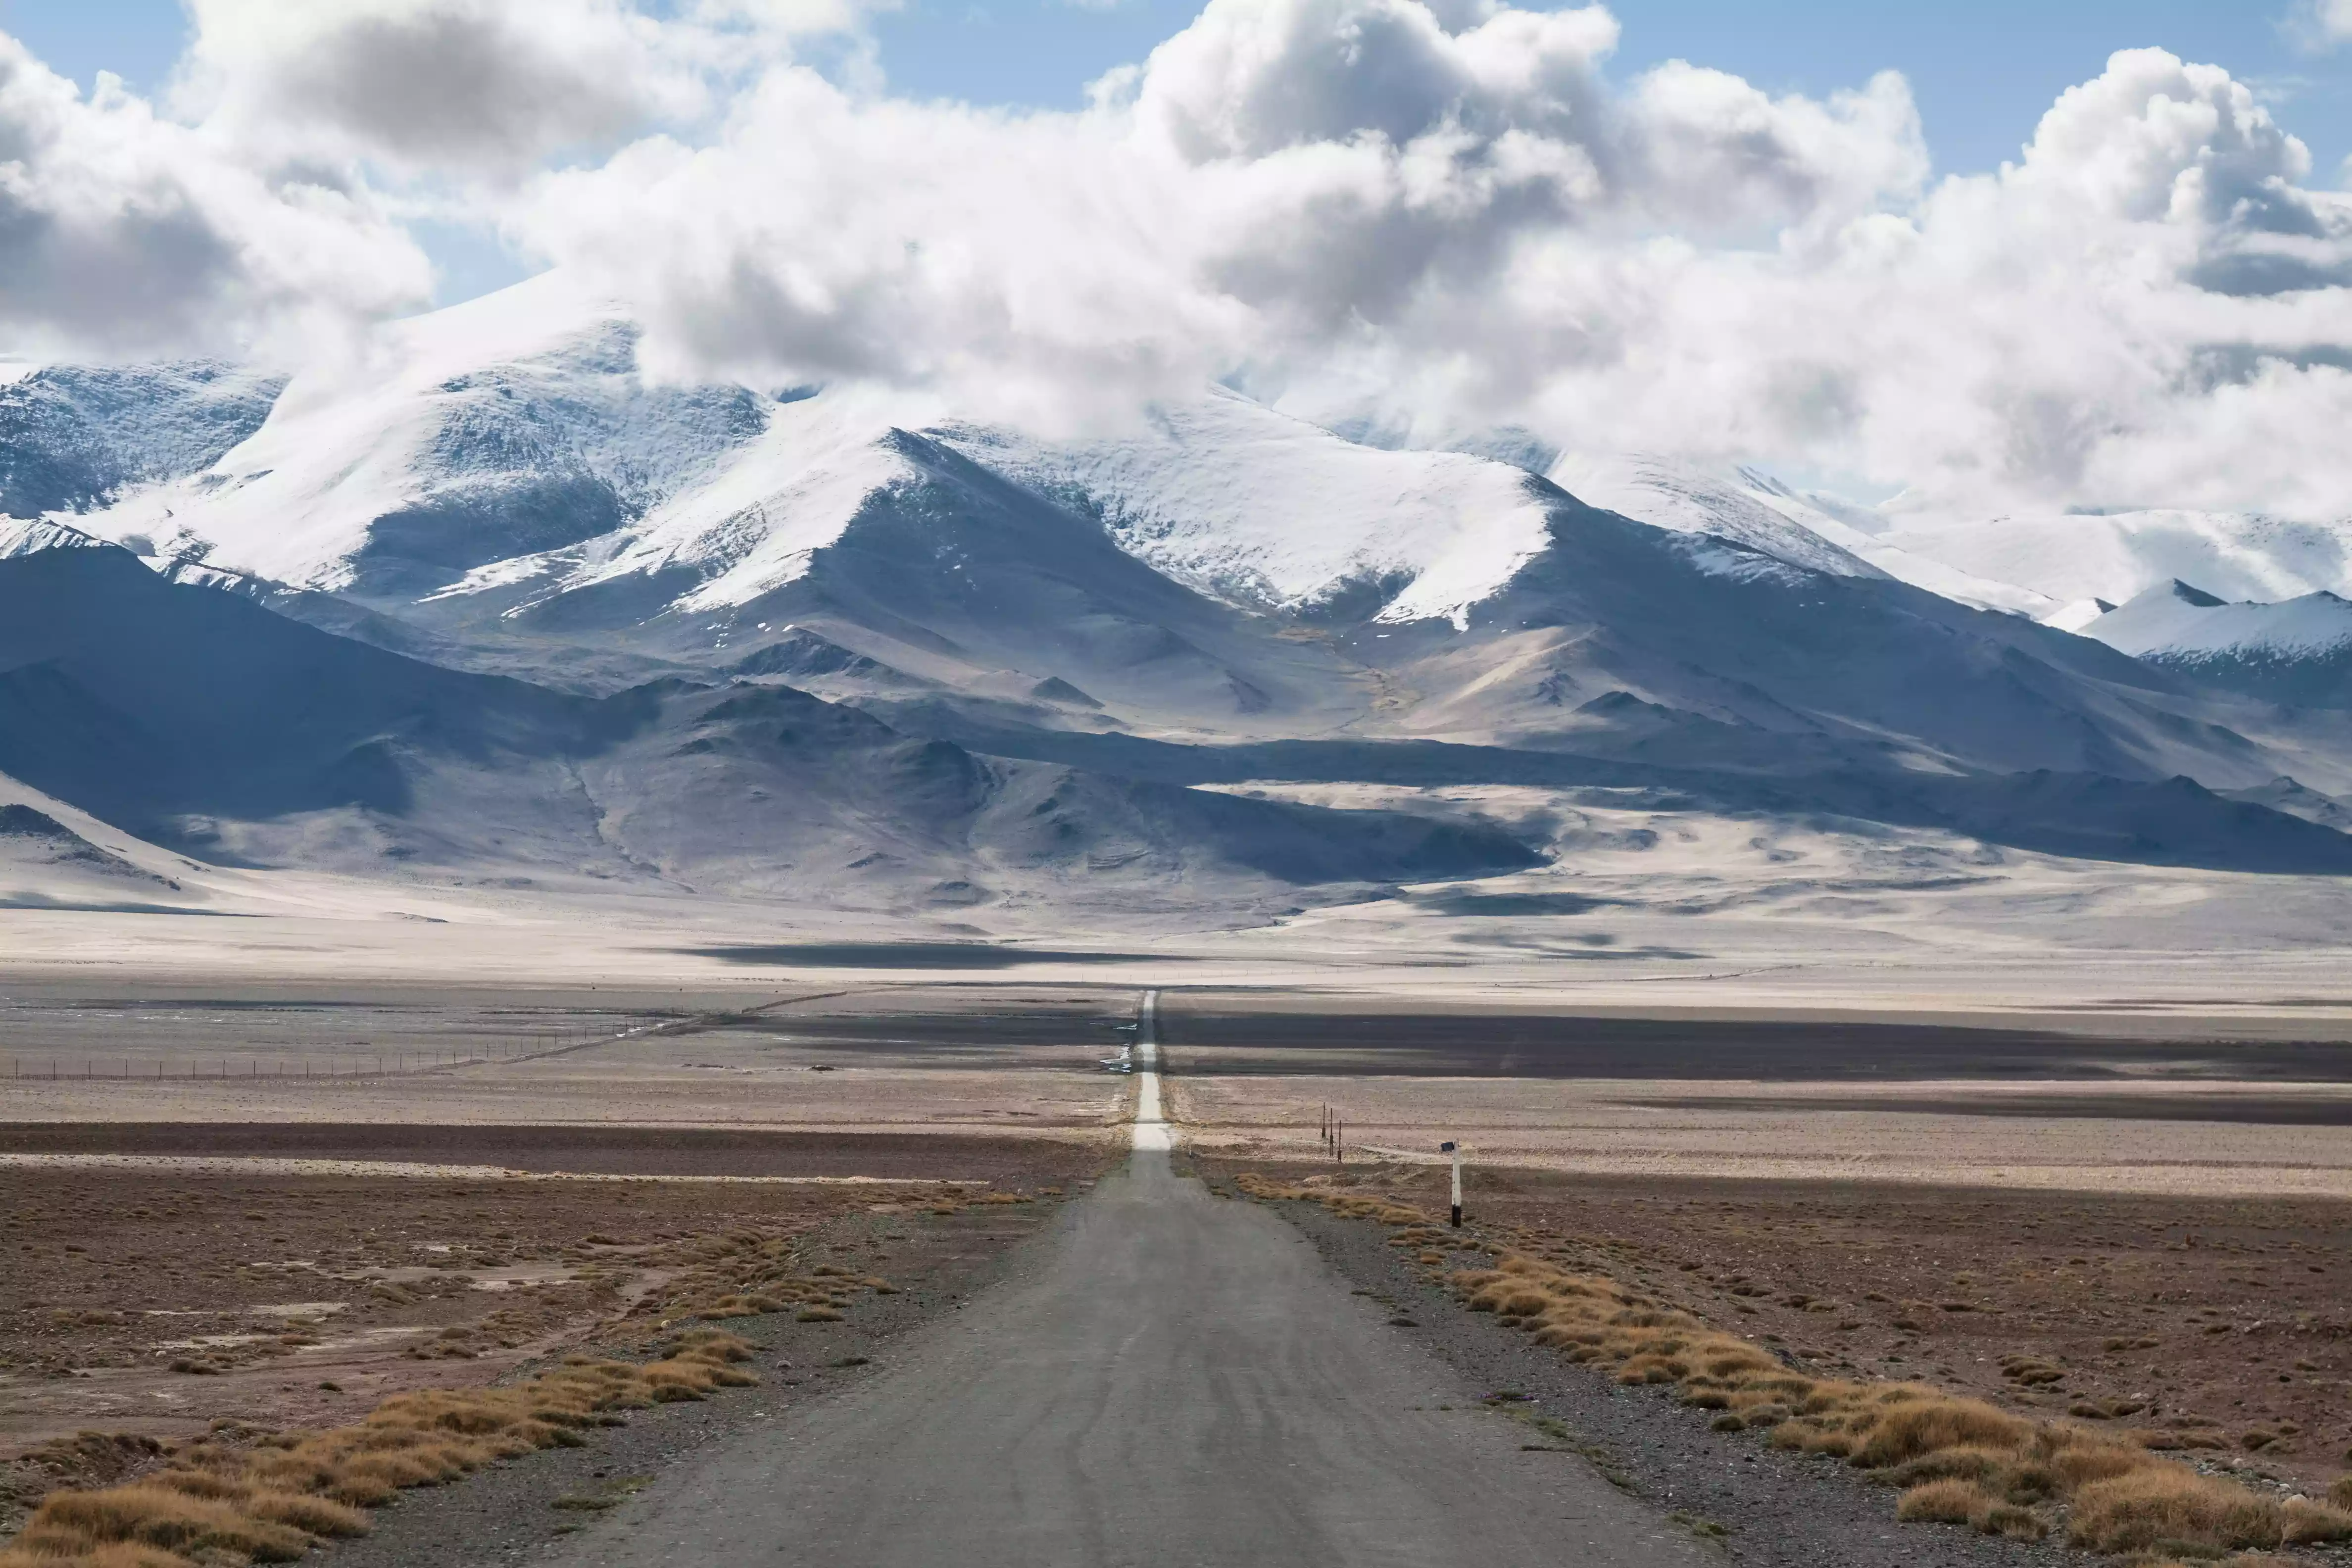 Pamir Highway in Tajikistan with the Pamir Mountains looming in the background